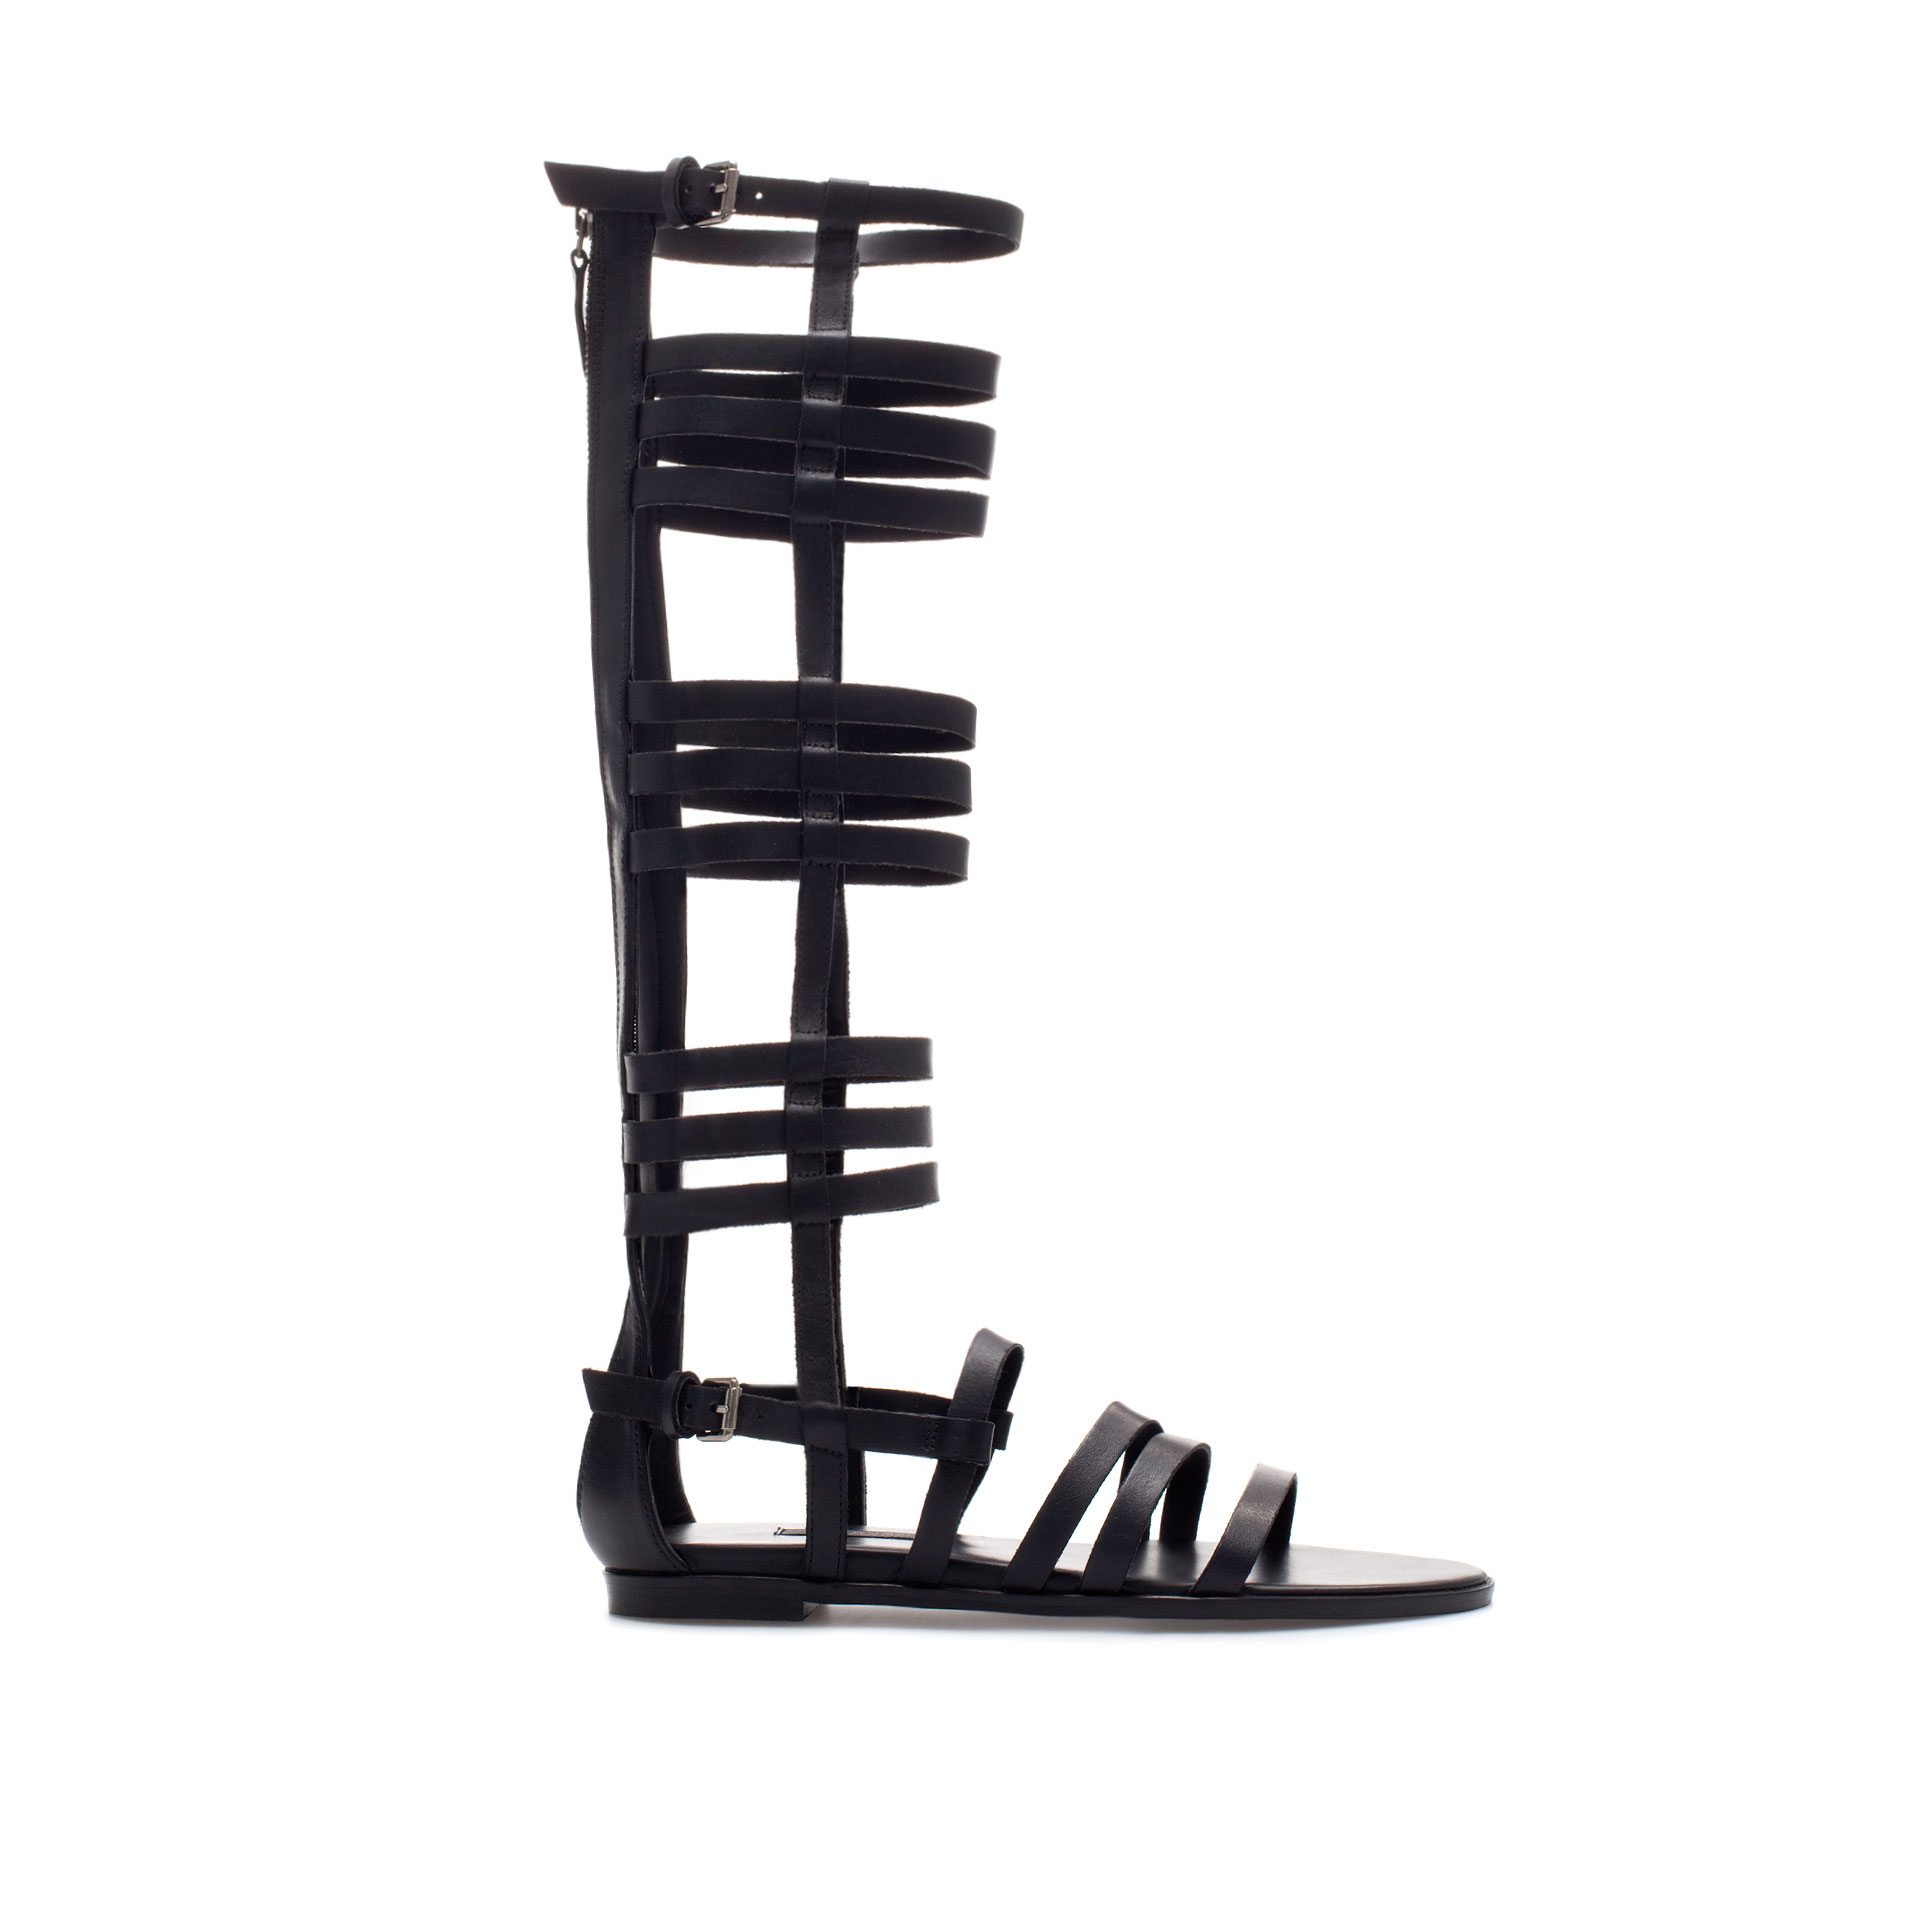 ... Whatâ€™s Haute: Help me find affordable, knee-high gladiator sandals